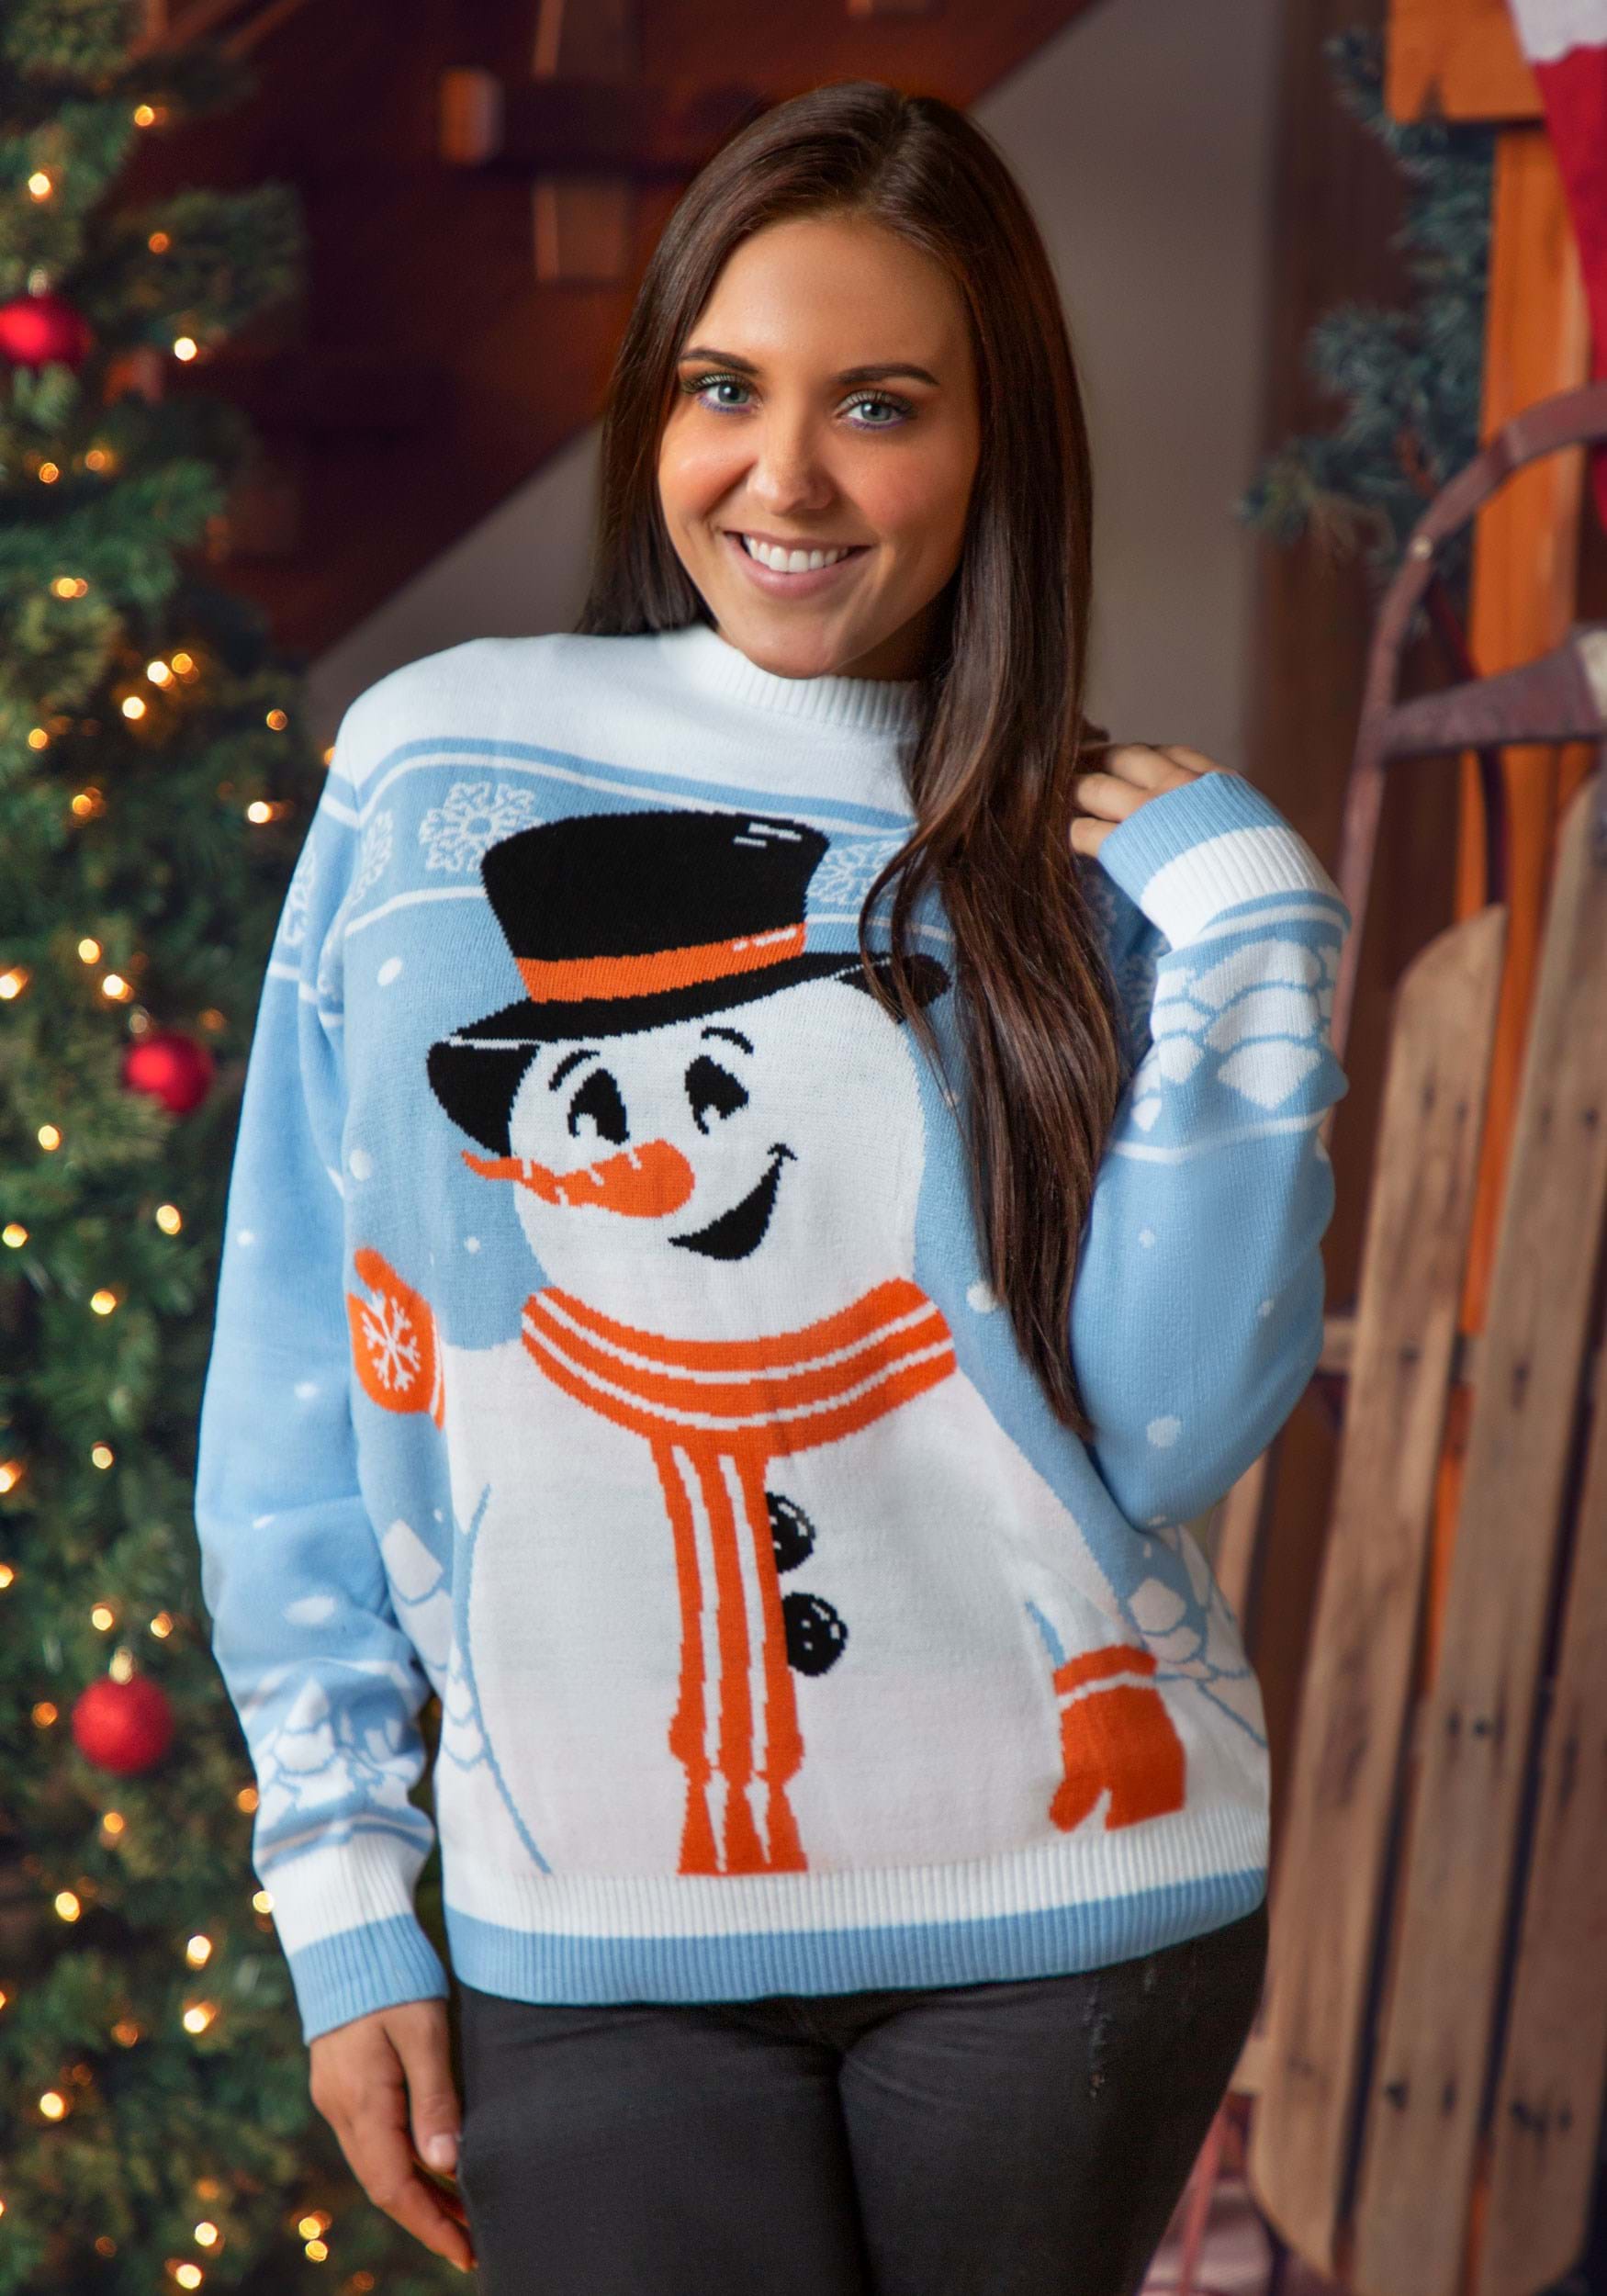 Friendly Snowman Adult Ugly Christmas Sweater